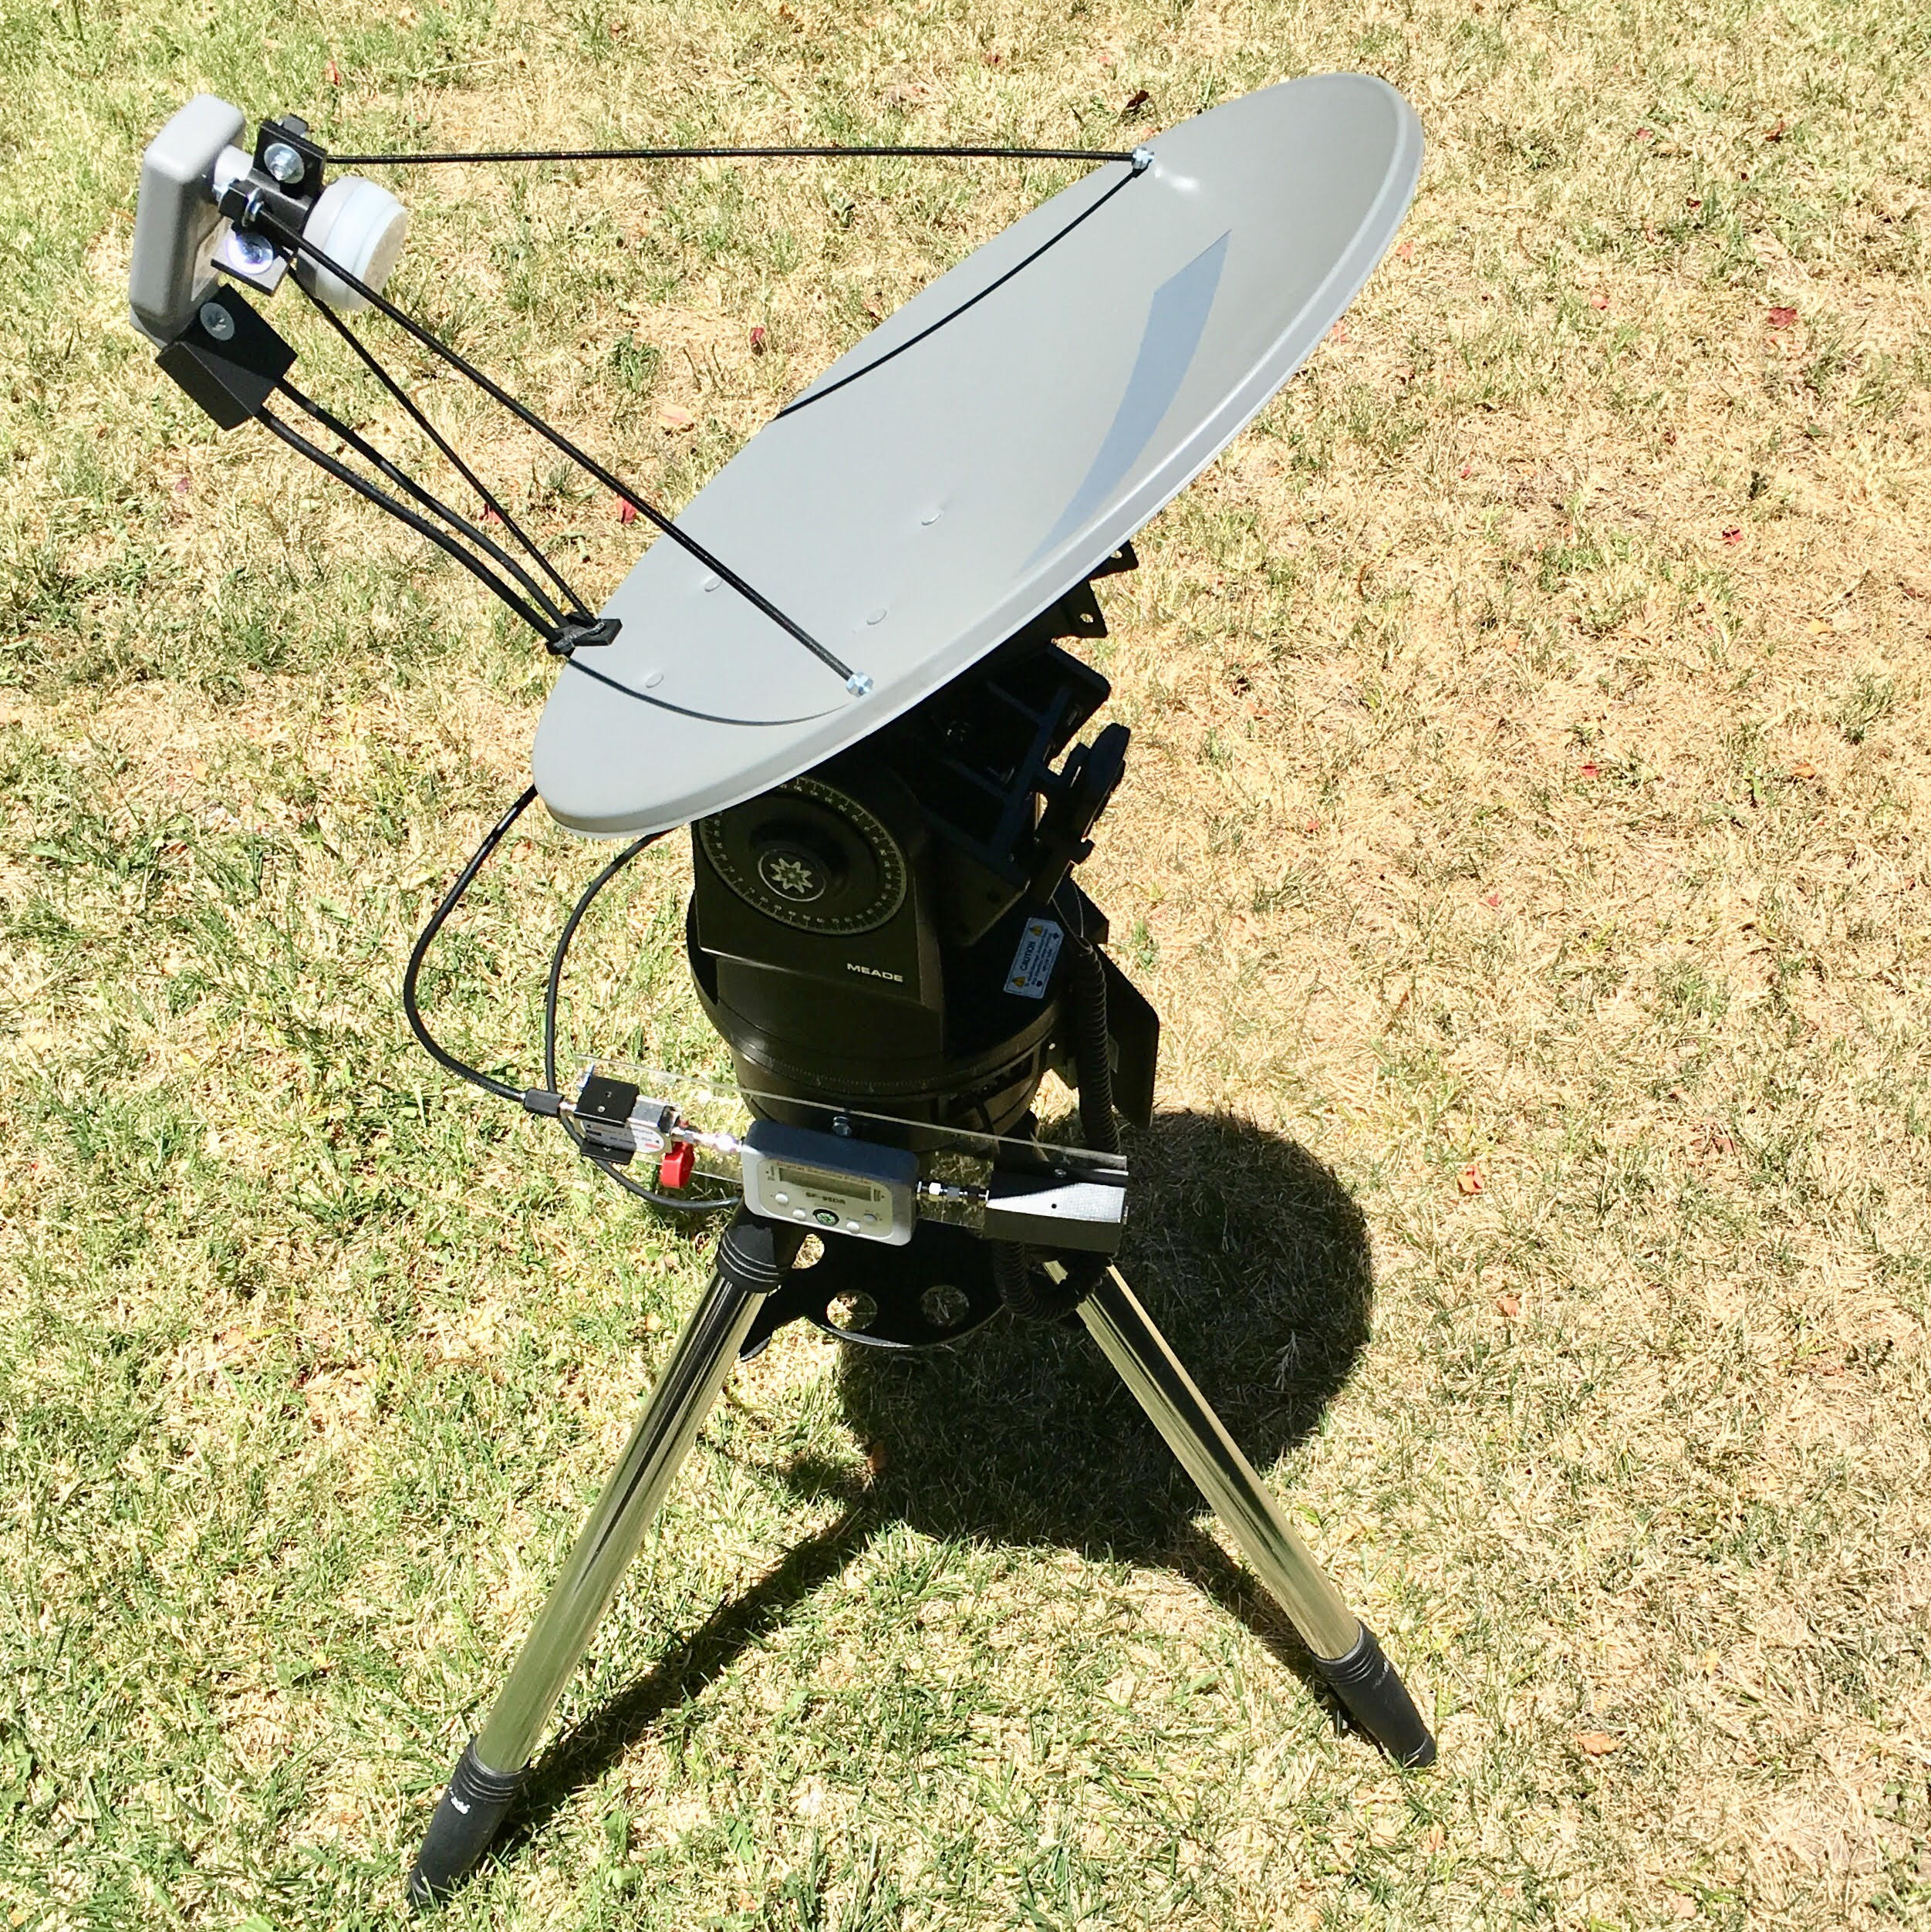 A Little Radio Telescope using a Meade Mount and a Satellite Dish hq nude pic